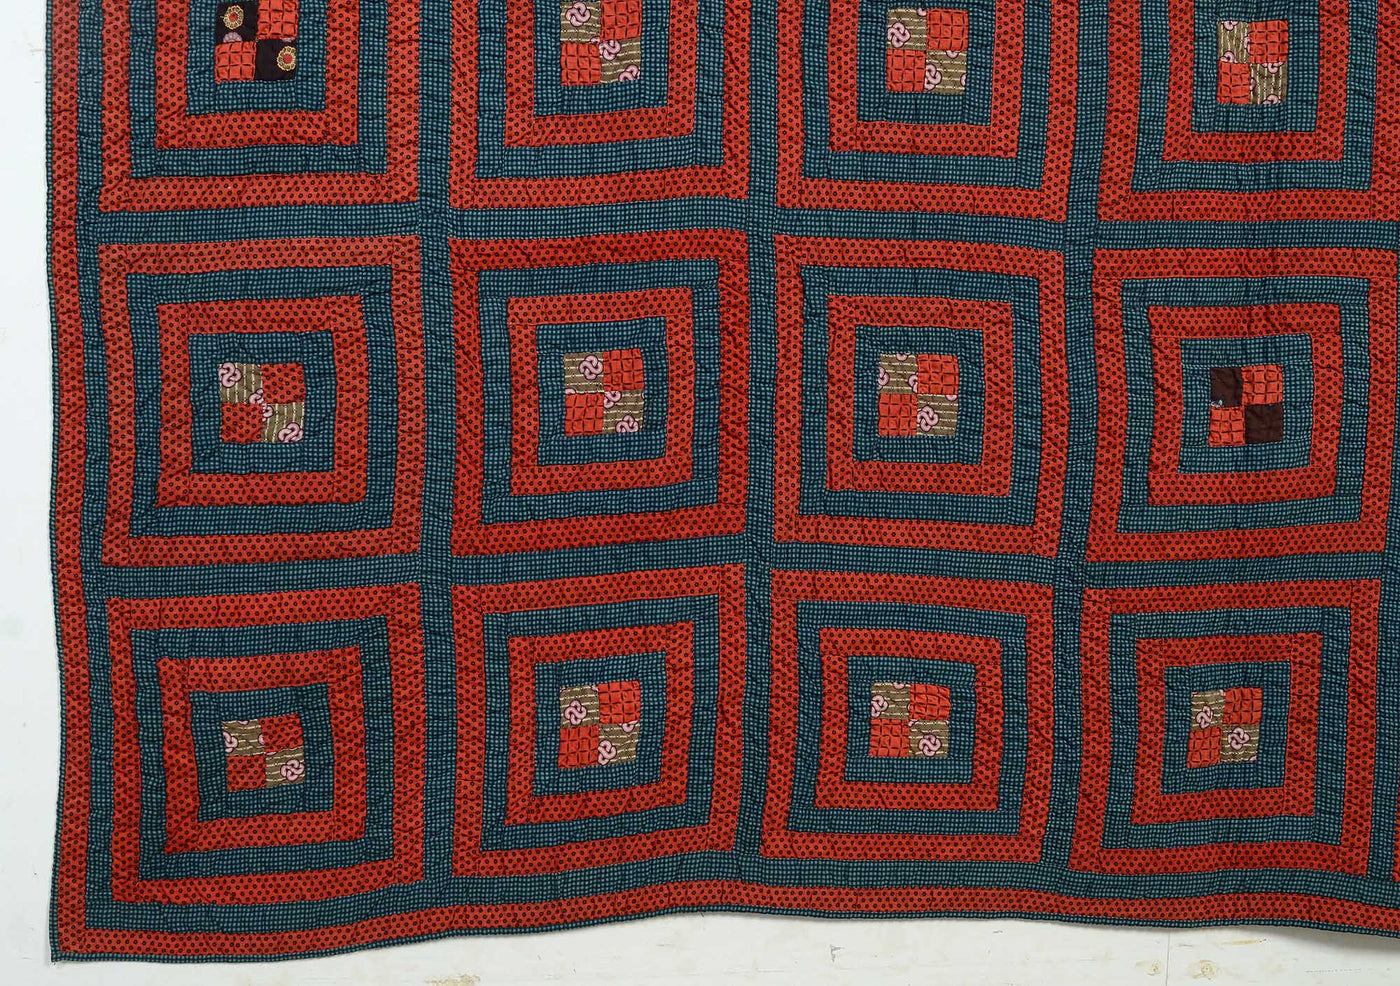 concentric-squares-quilt-with-four-patch-1429169-detail-4